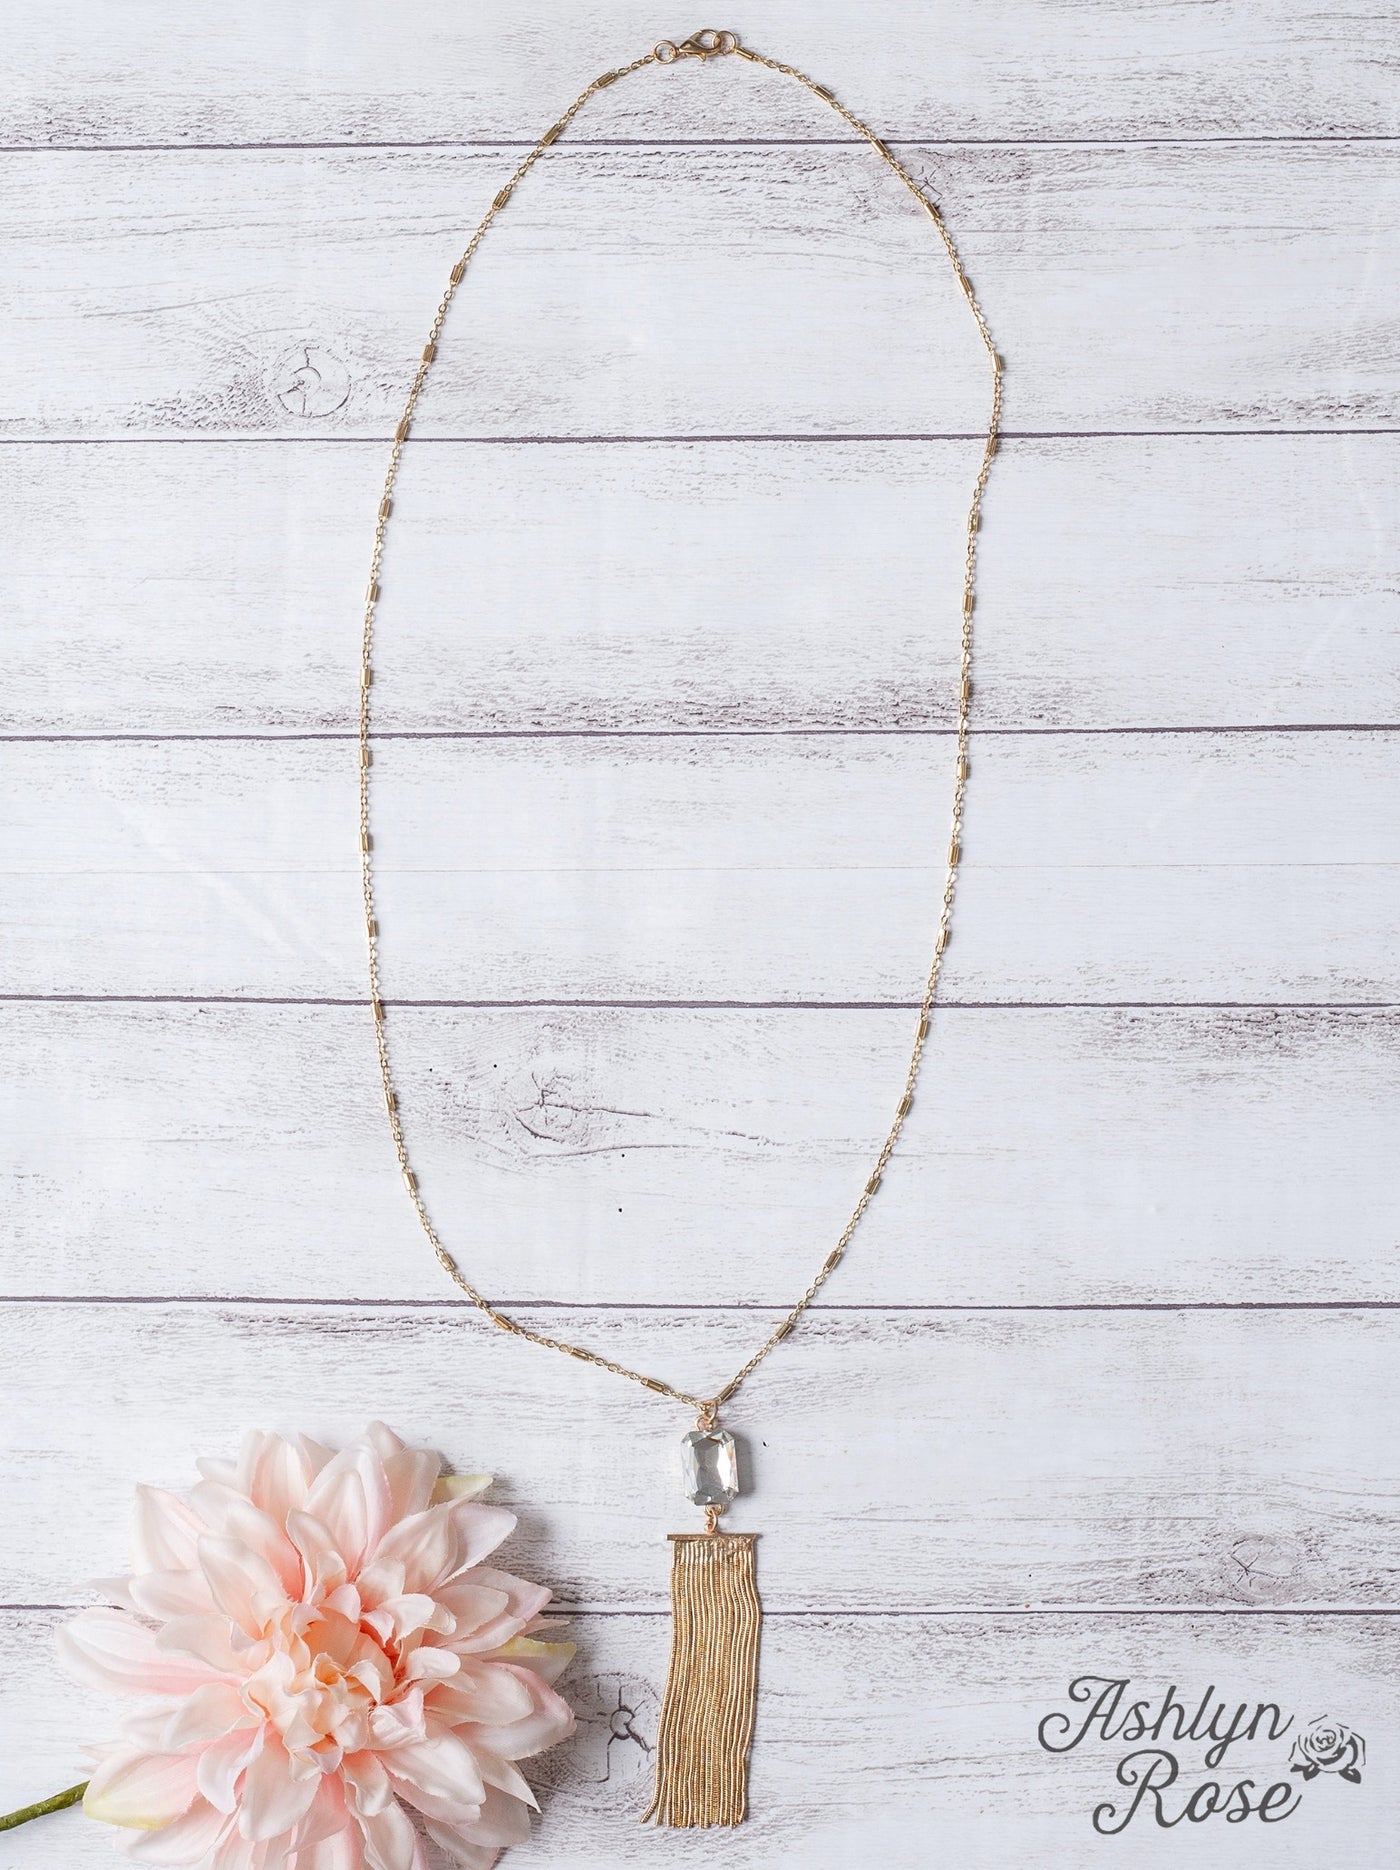 CATCH THE LIGHT SQUARE CRYSTAL GOLD FRINGE PENDANT ON A GOLD CHAIN NECKLACE